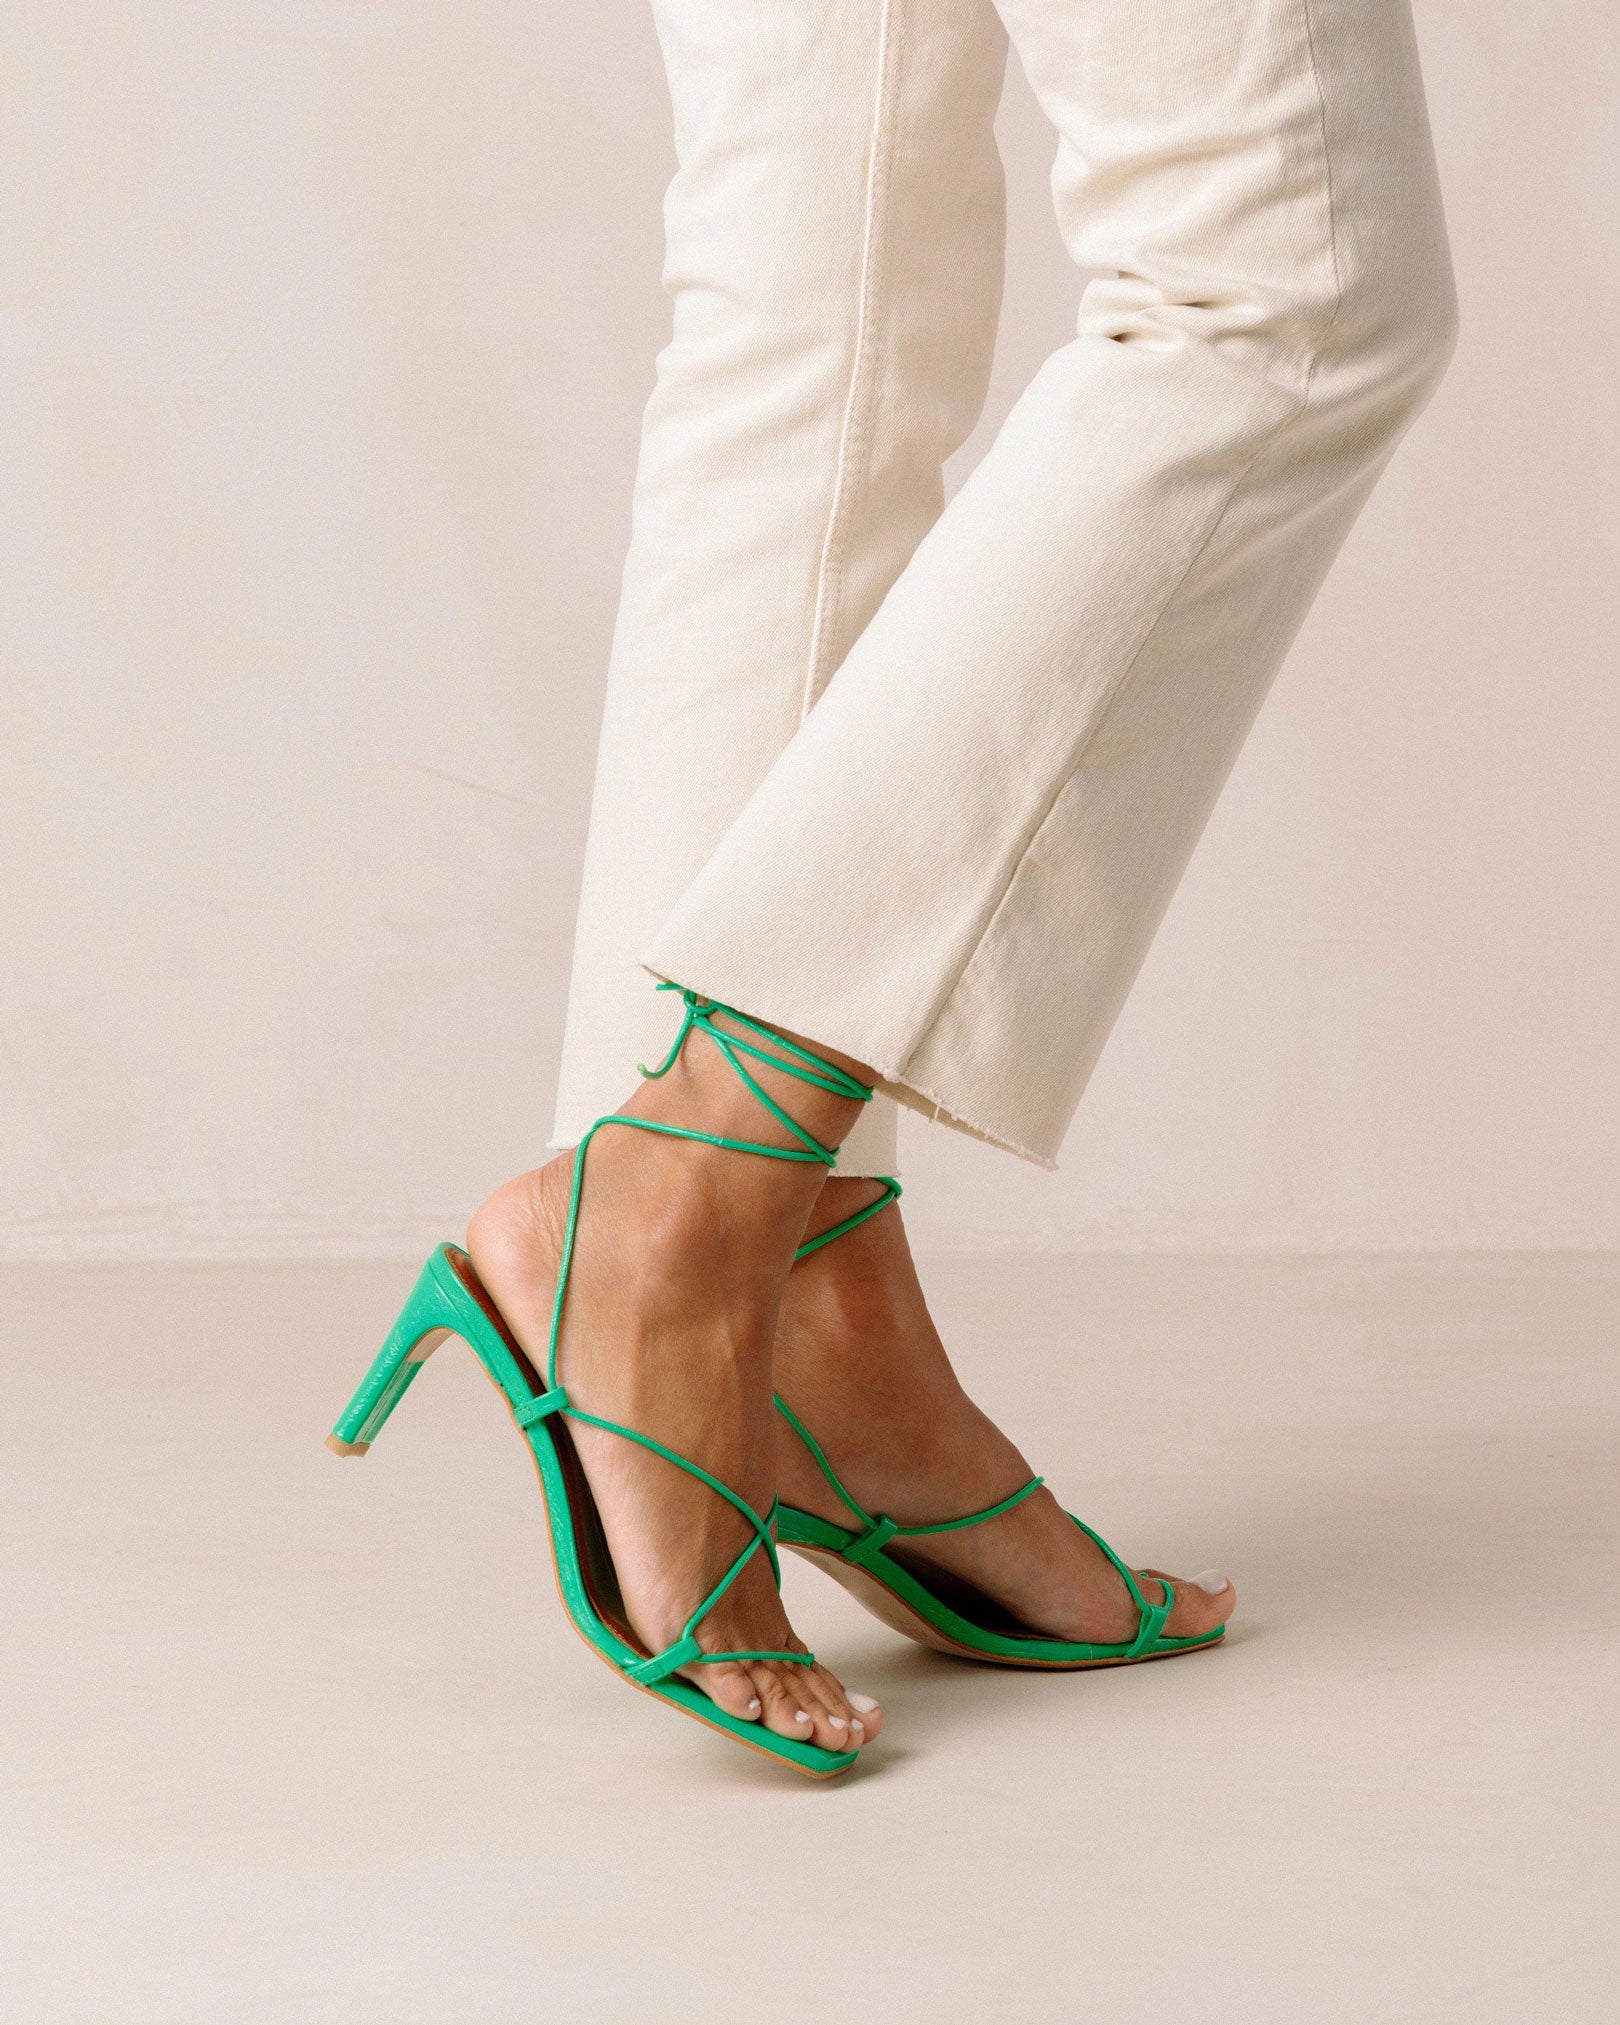 ALOHAS Bellini Sandal in Neon Green available at Lahn.shop